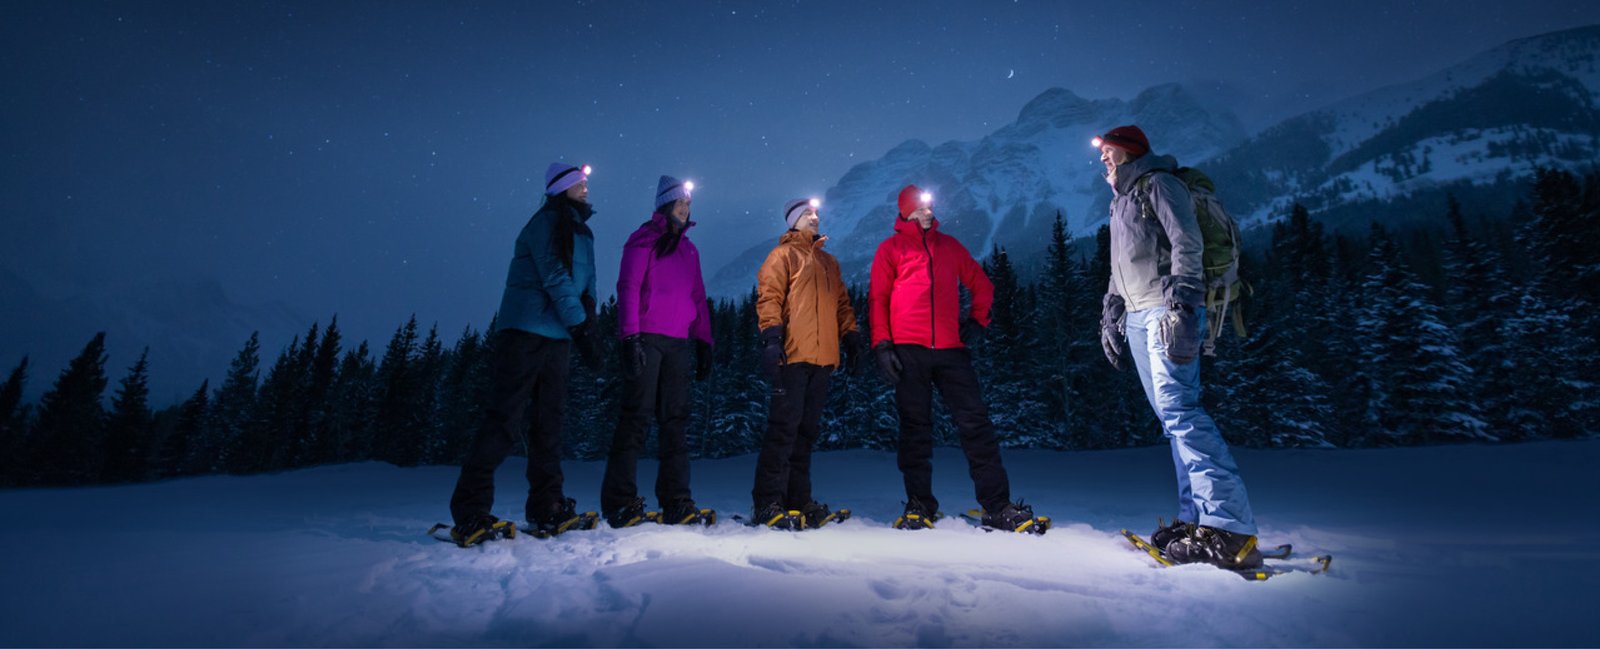 Four friends and a guide in snowshoes looking up at the night sky featuring the forest, mountains and stars.